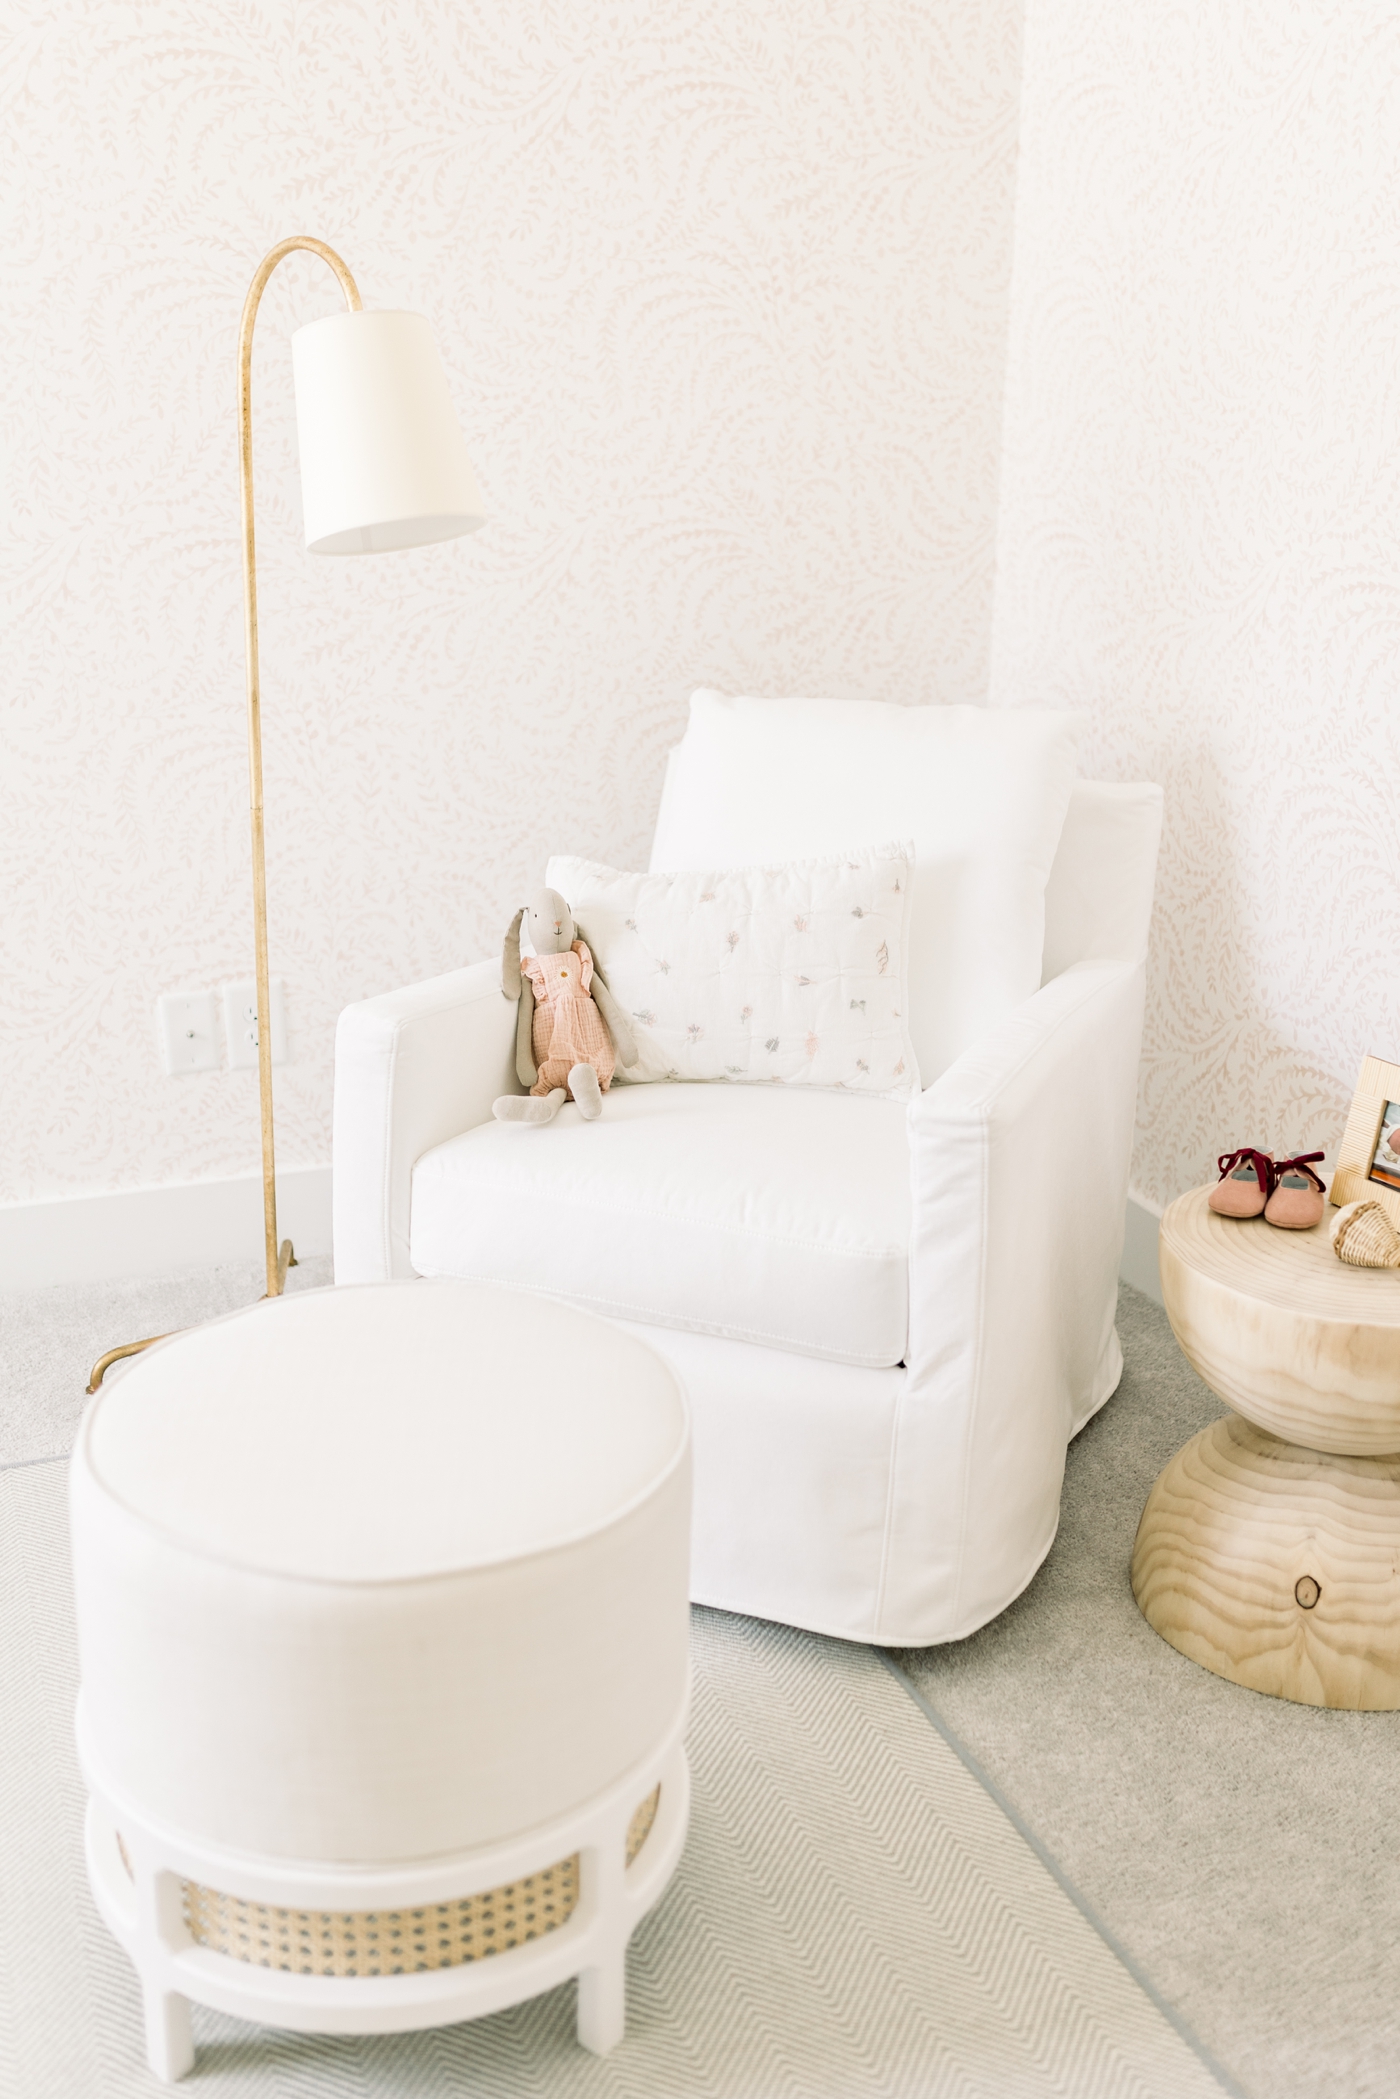 Glider with white slip cover in baby girl's nursery | Photo by Caitlyn Motycka Photography.